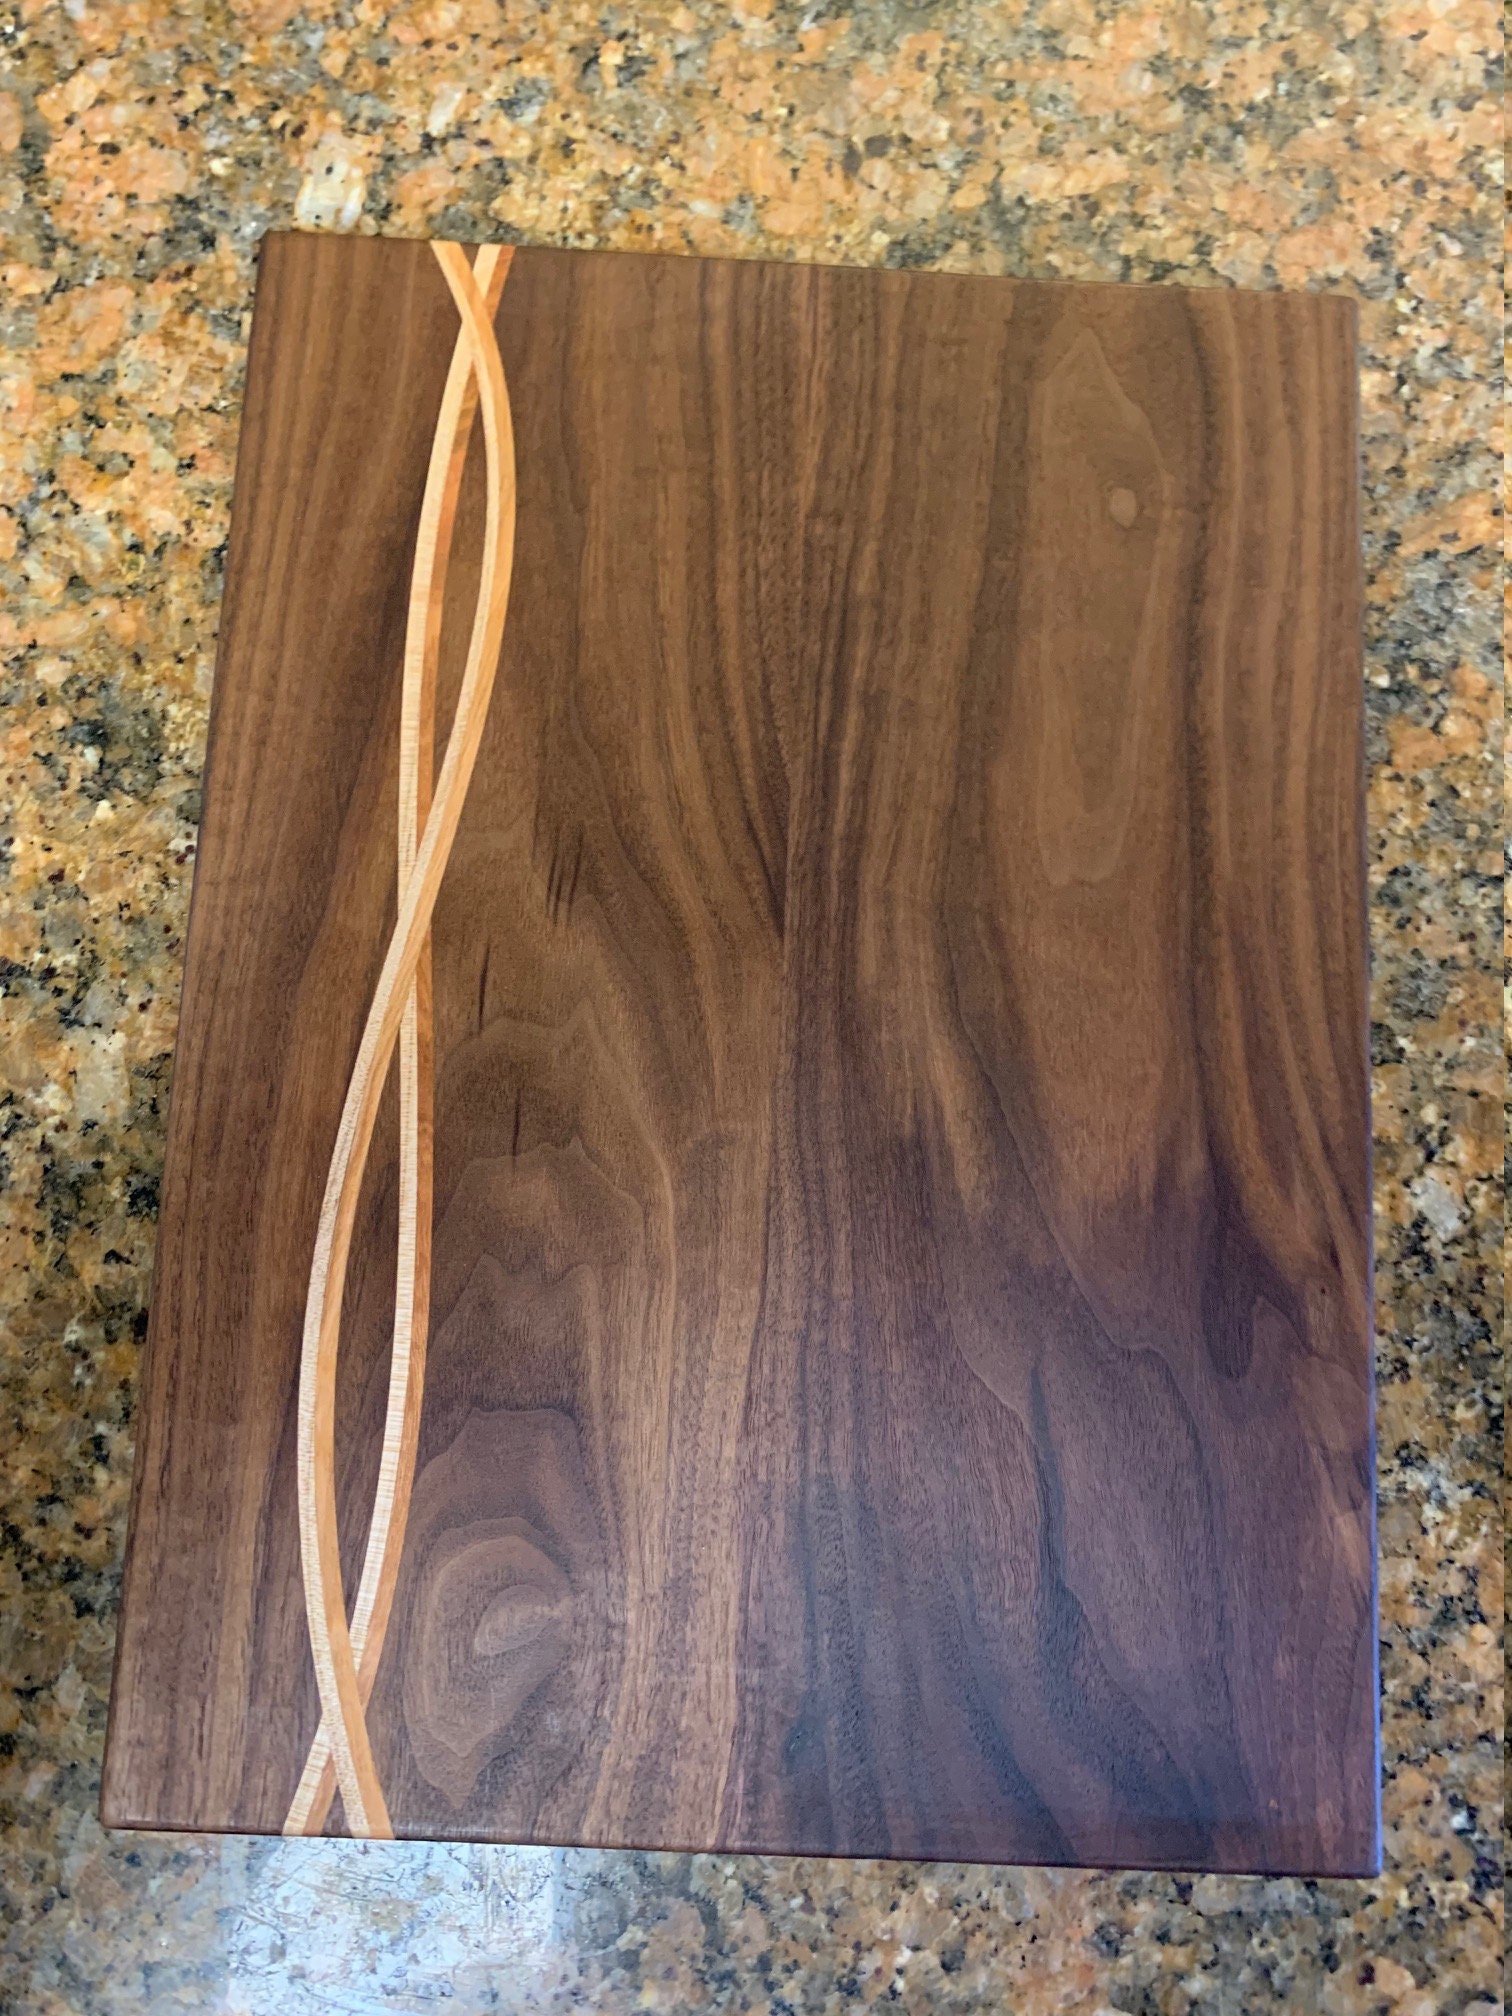 Hand made and made to be used Maple and Cherry cutting board